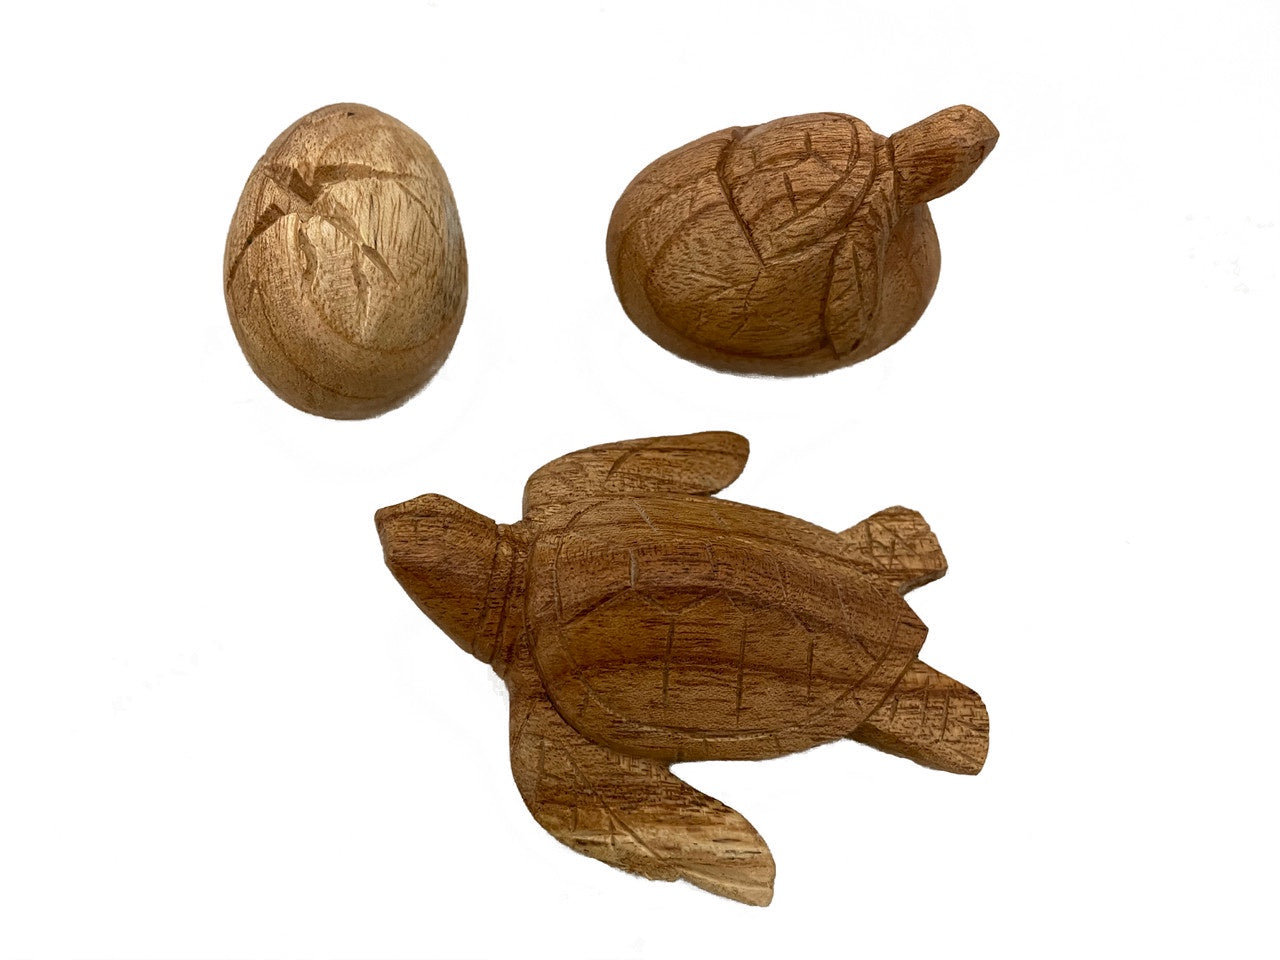 PAPOOSE - Turtle Life Cycle - Wooden Figures - 3 pc